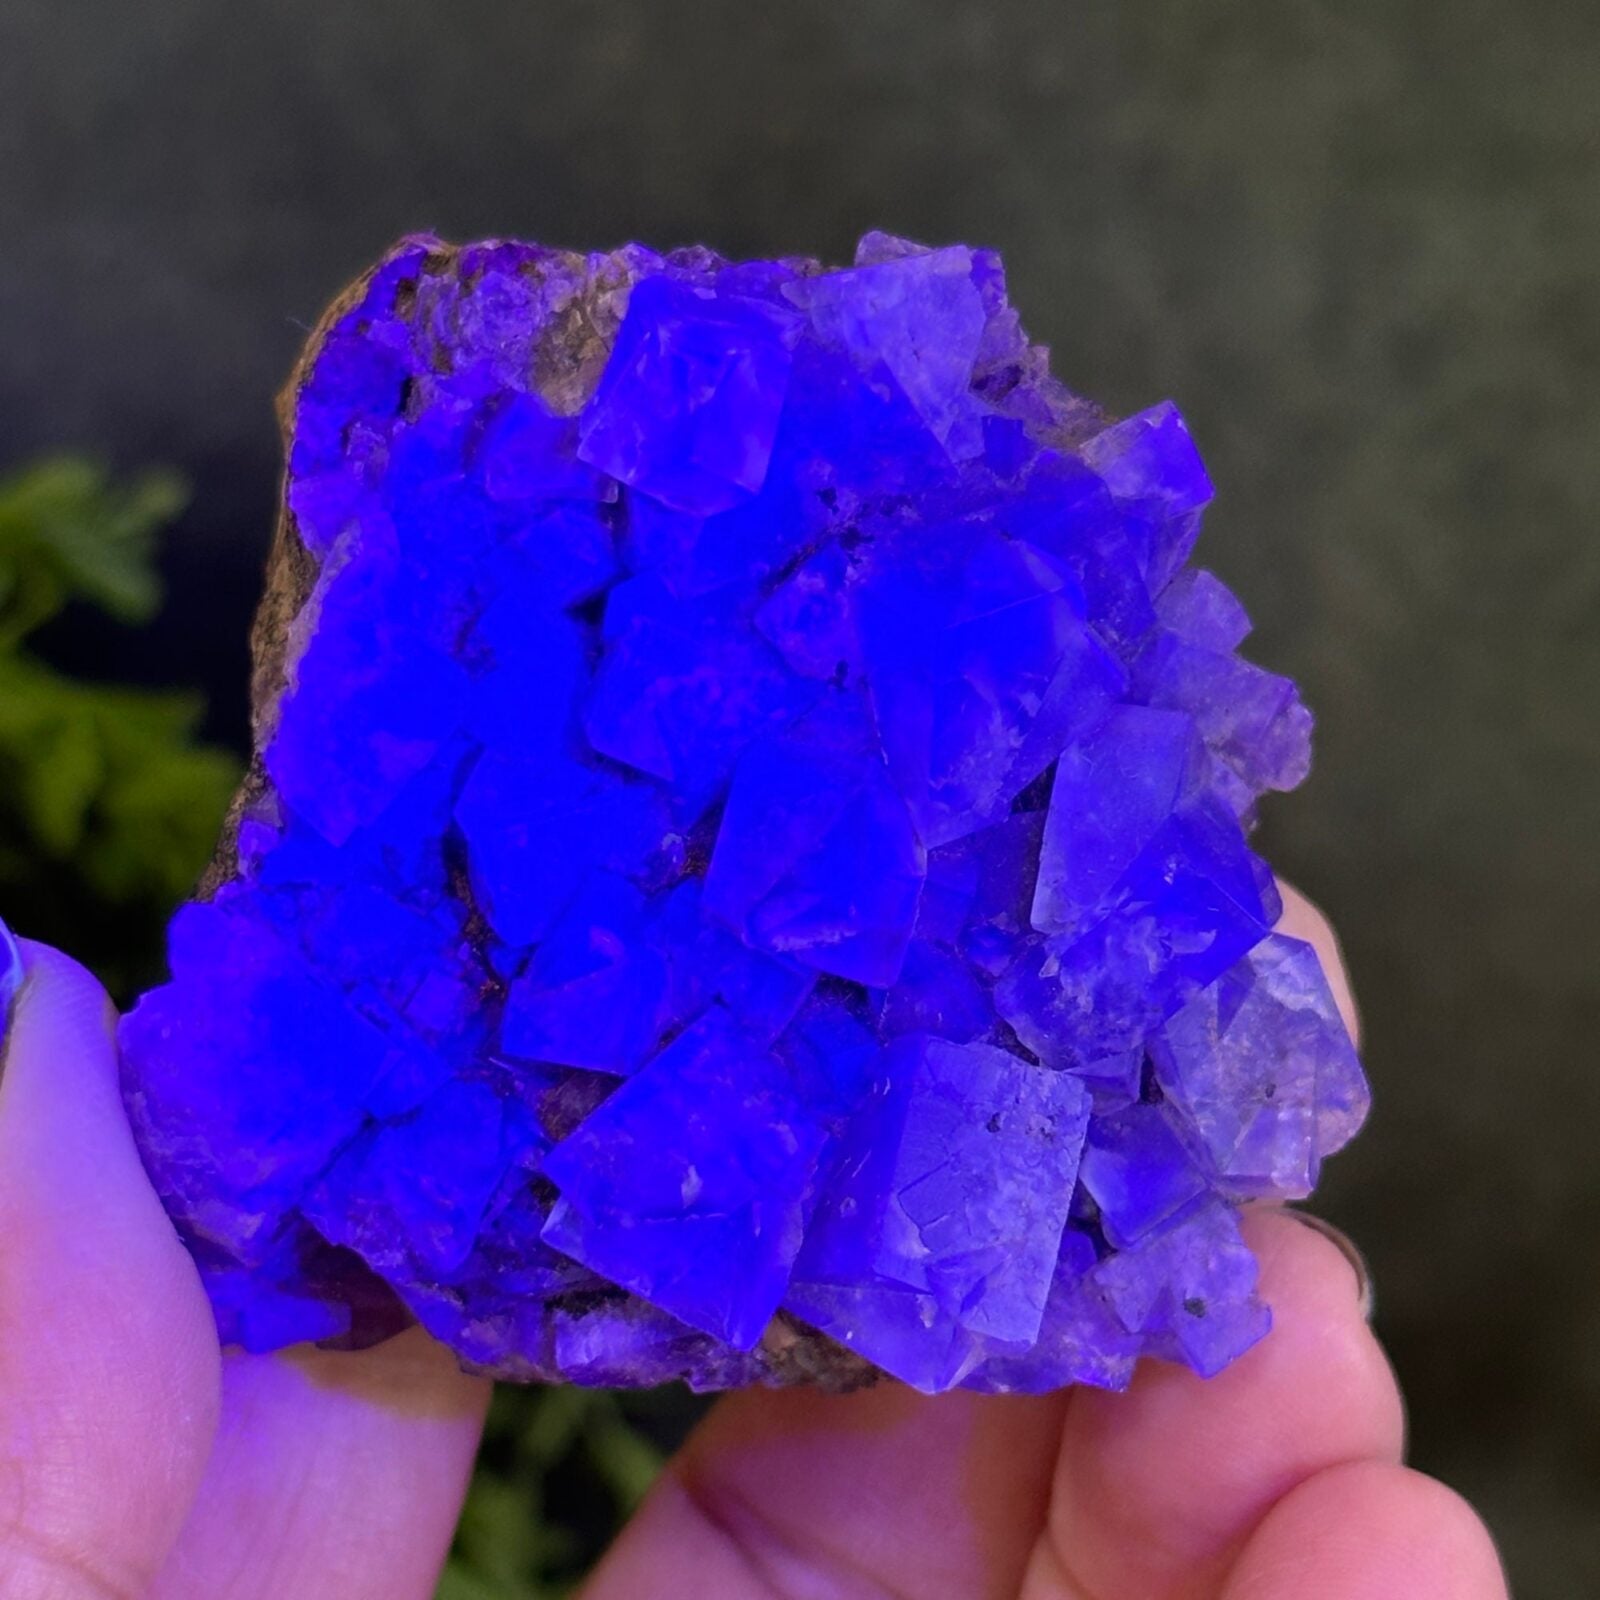 UV active Blue/Green Fluorite cluster from UK